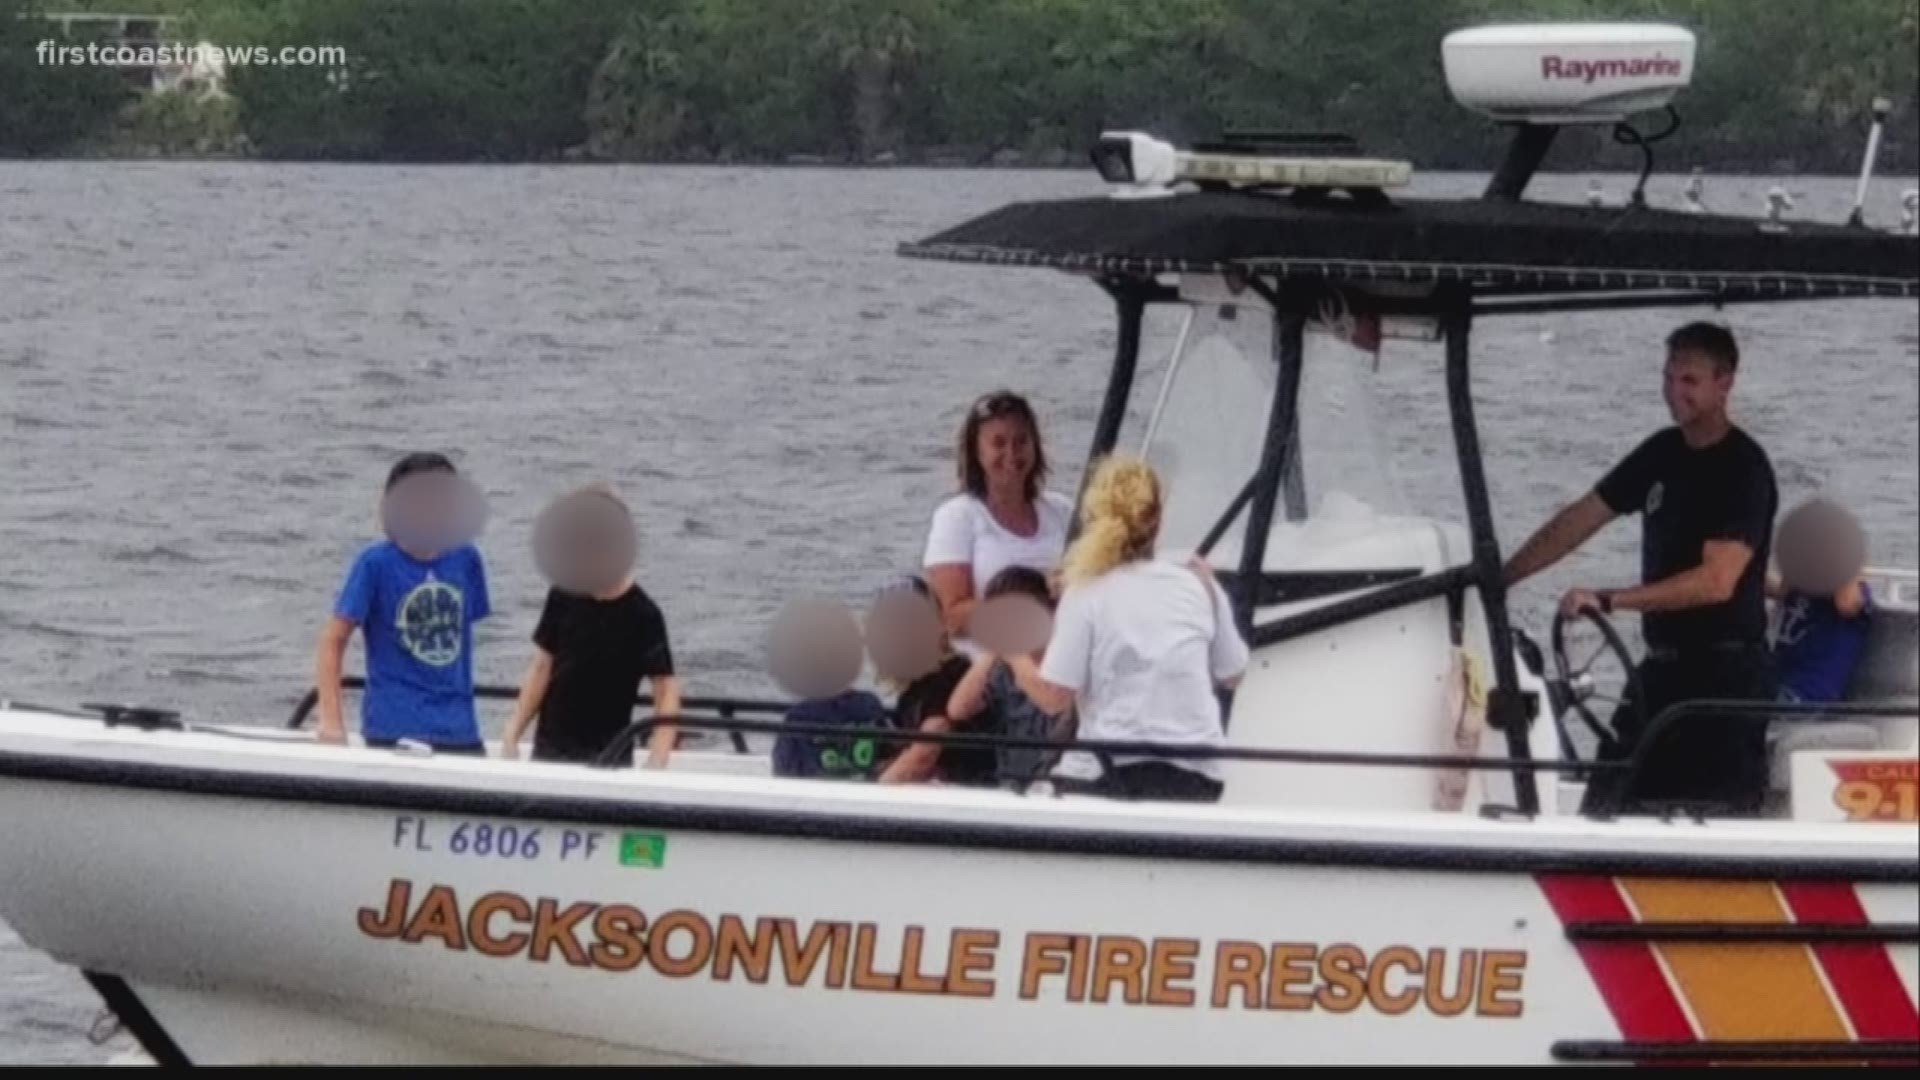 A group of people, including five children, were seen aboard a JFRD vessel in the Trout River with no life jackets on spurred questions of boating requirements. Did they violate the law?